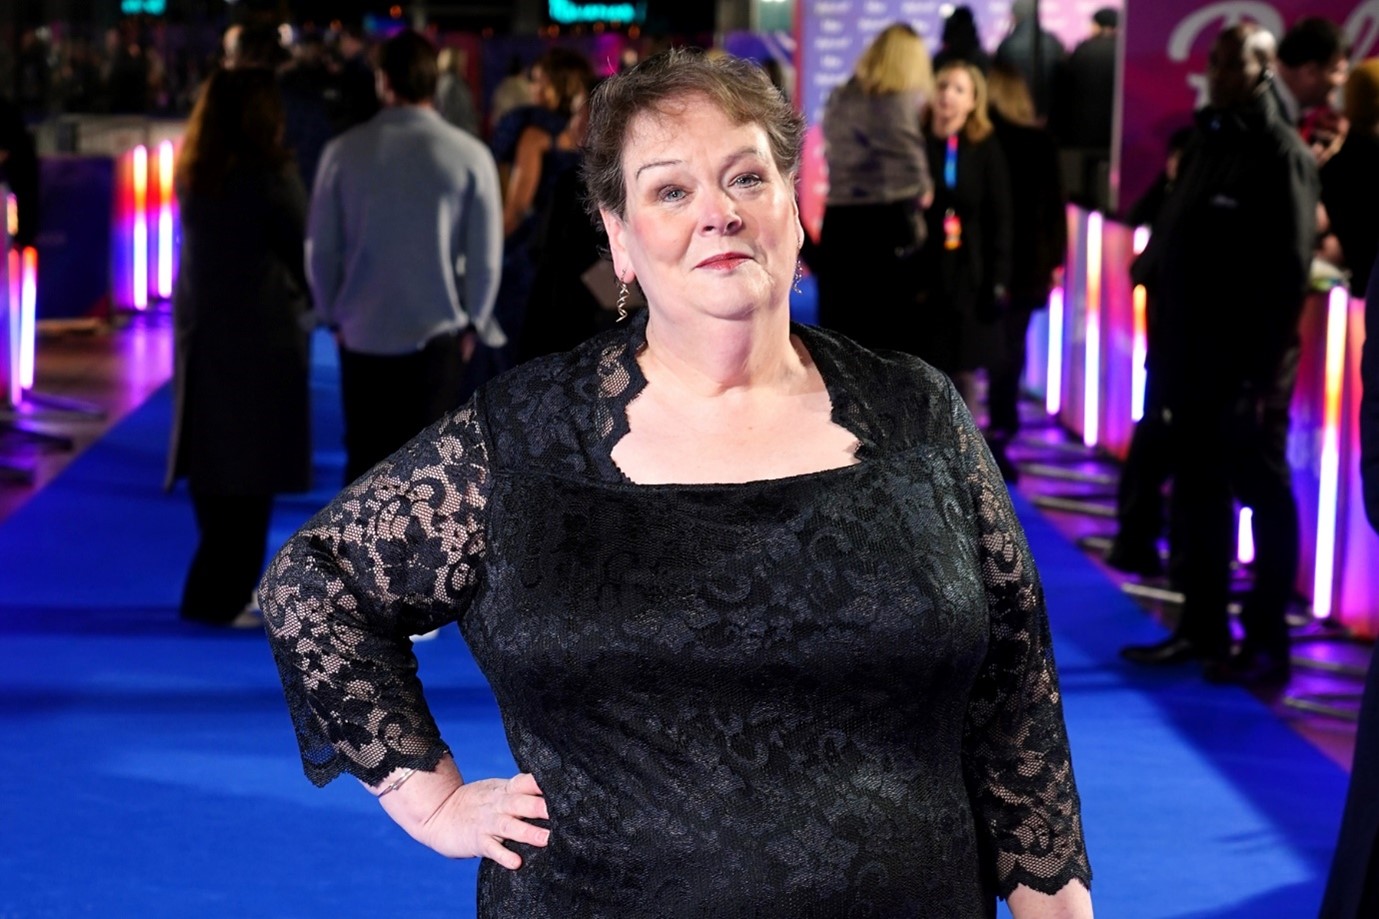 Anne Hegerty Partner: Is The Chase star in a relationship?